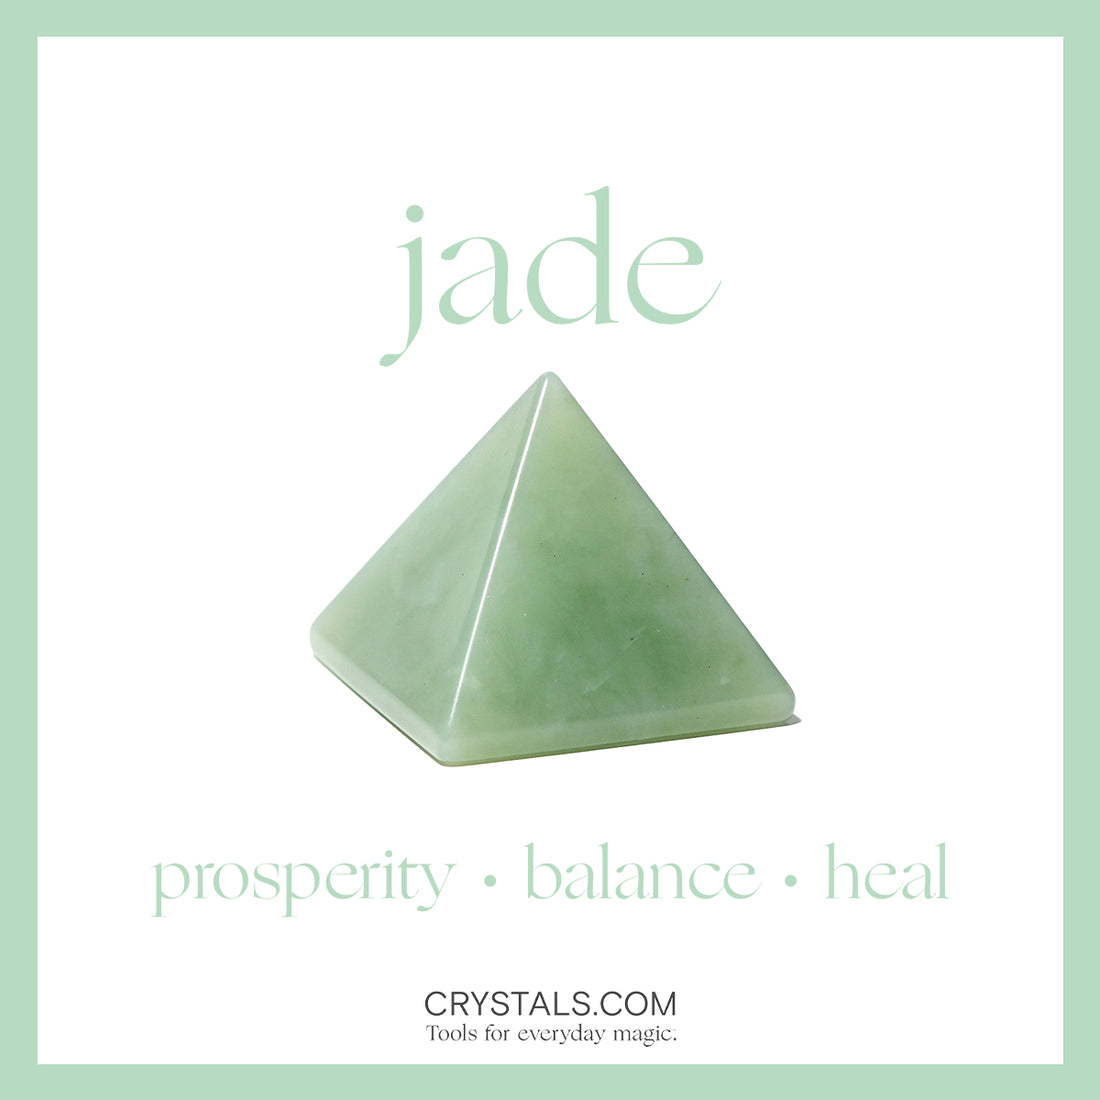 Jade Stone: Meanings, Properties, and Uses